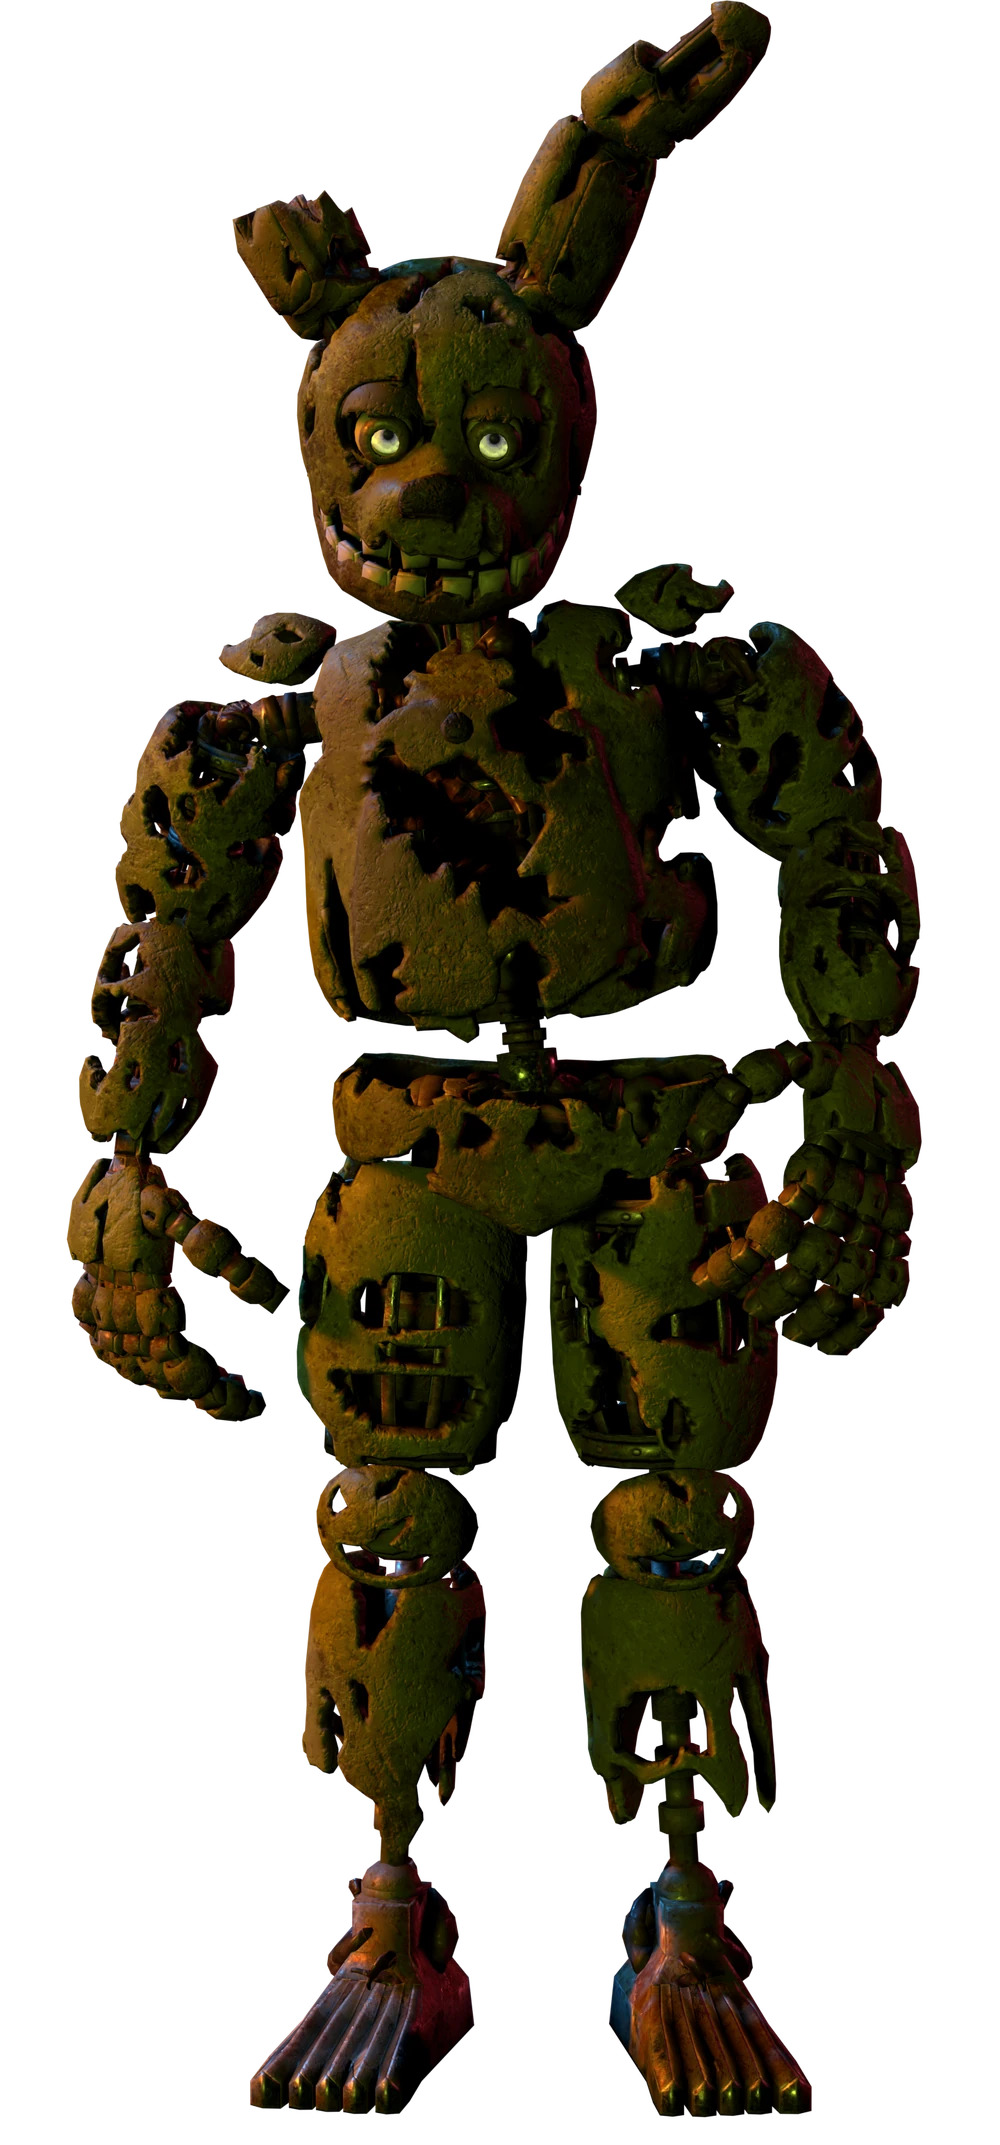 An image of Springtrap from Five Nights at Freddy's